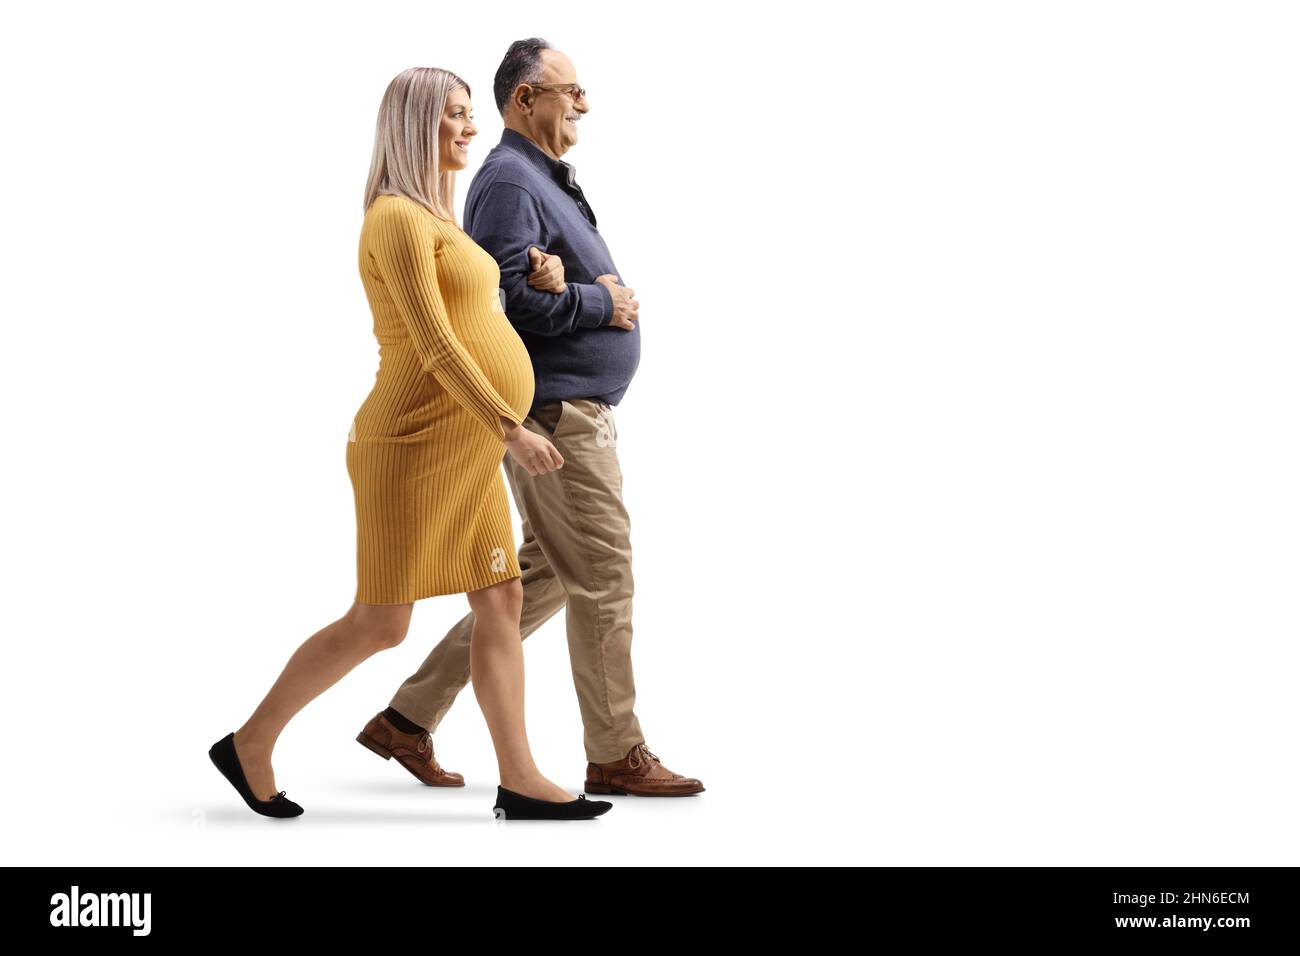 Full length profile shot of a pregnant woman walking with a mature man isolated on white background Stock Photo